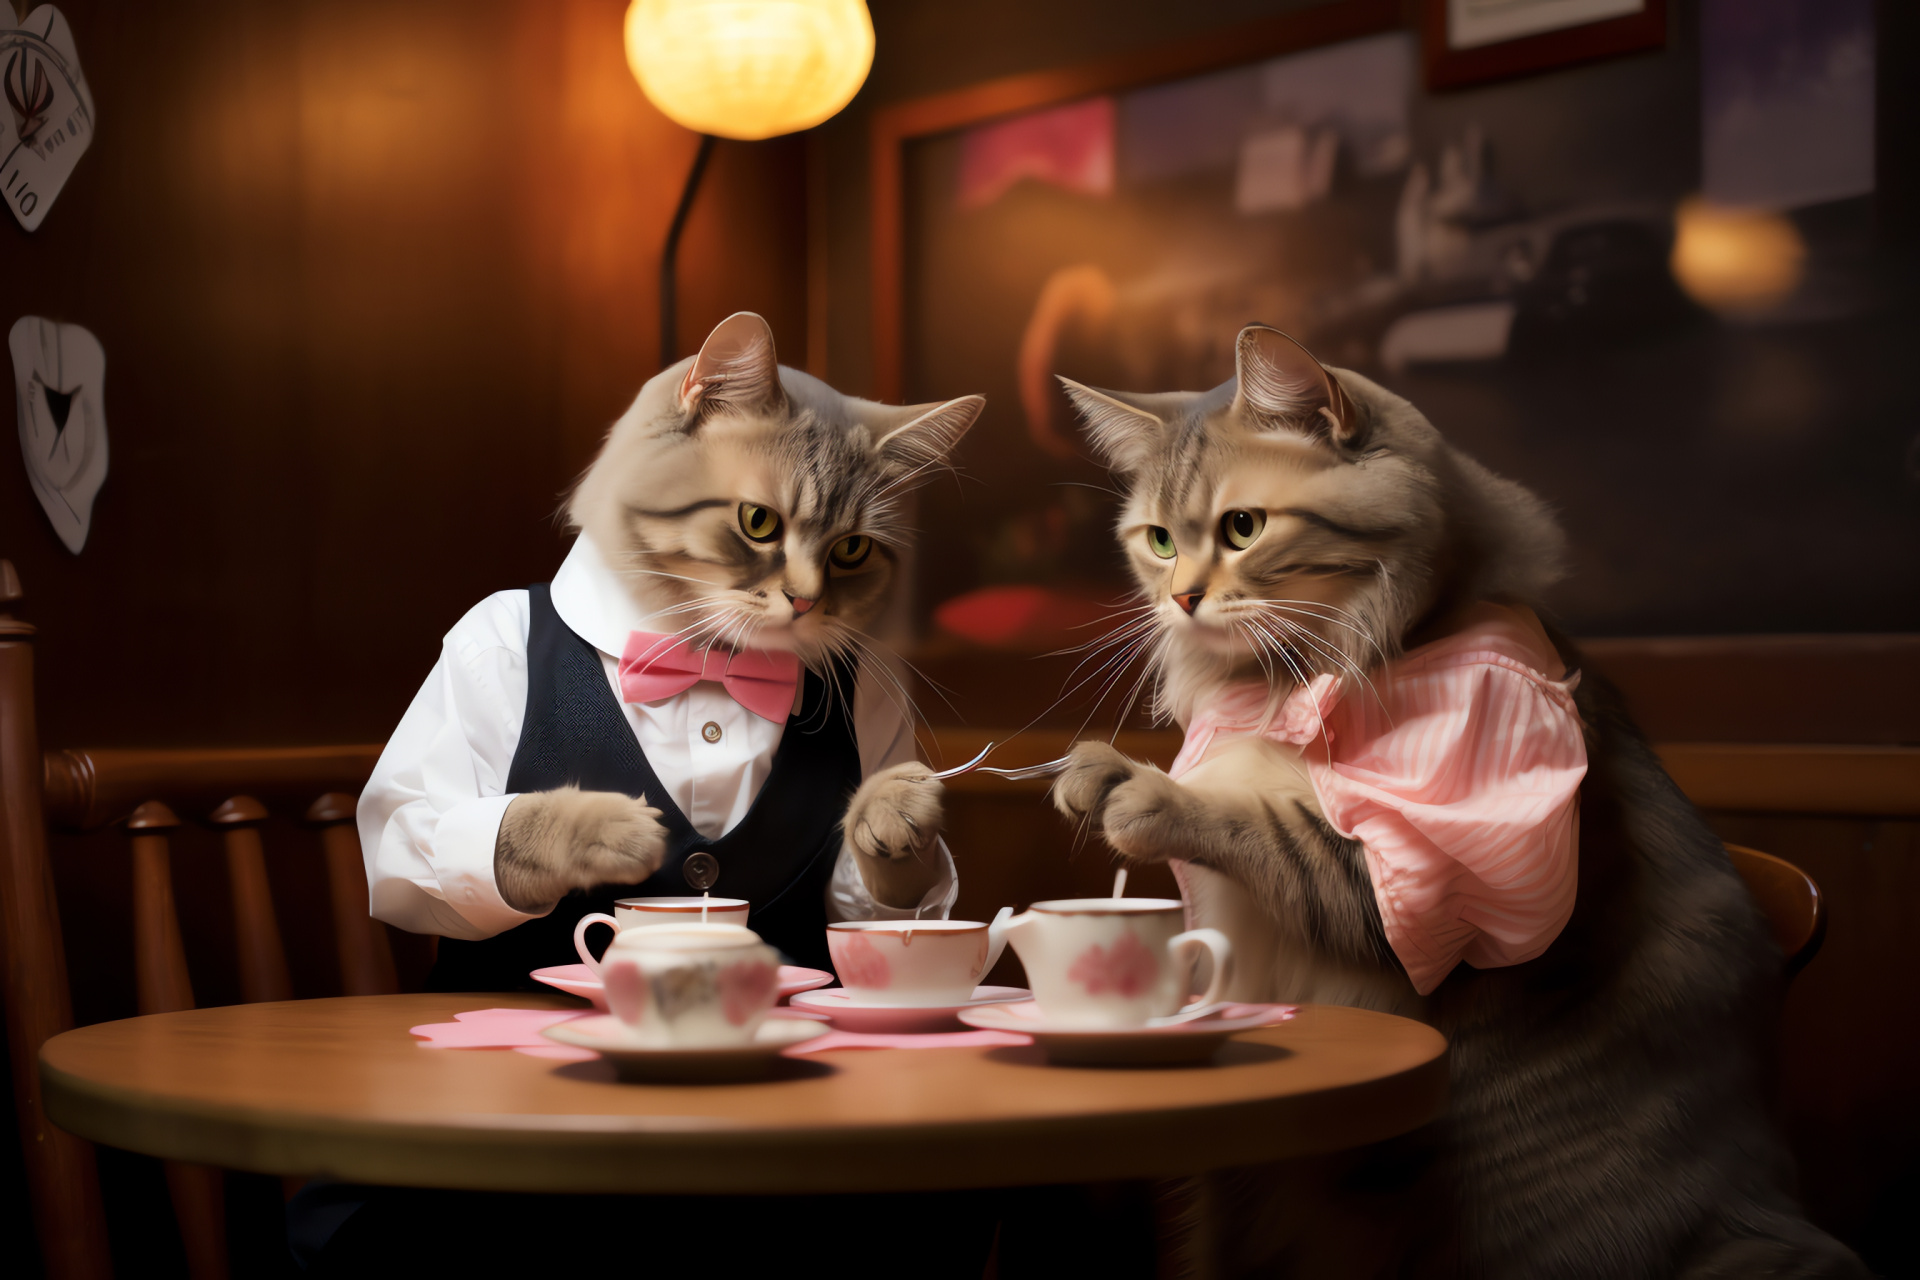 Valentine's cozy cafe ambiance, cat companions in love, caffeinated beverage enjoyment, smooth melody background, holiday in city sanctuary, HD Desktop Image